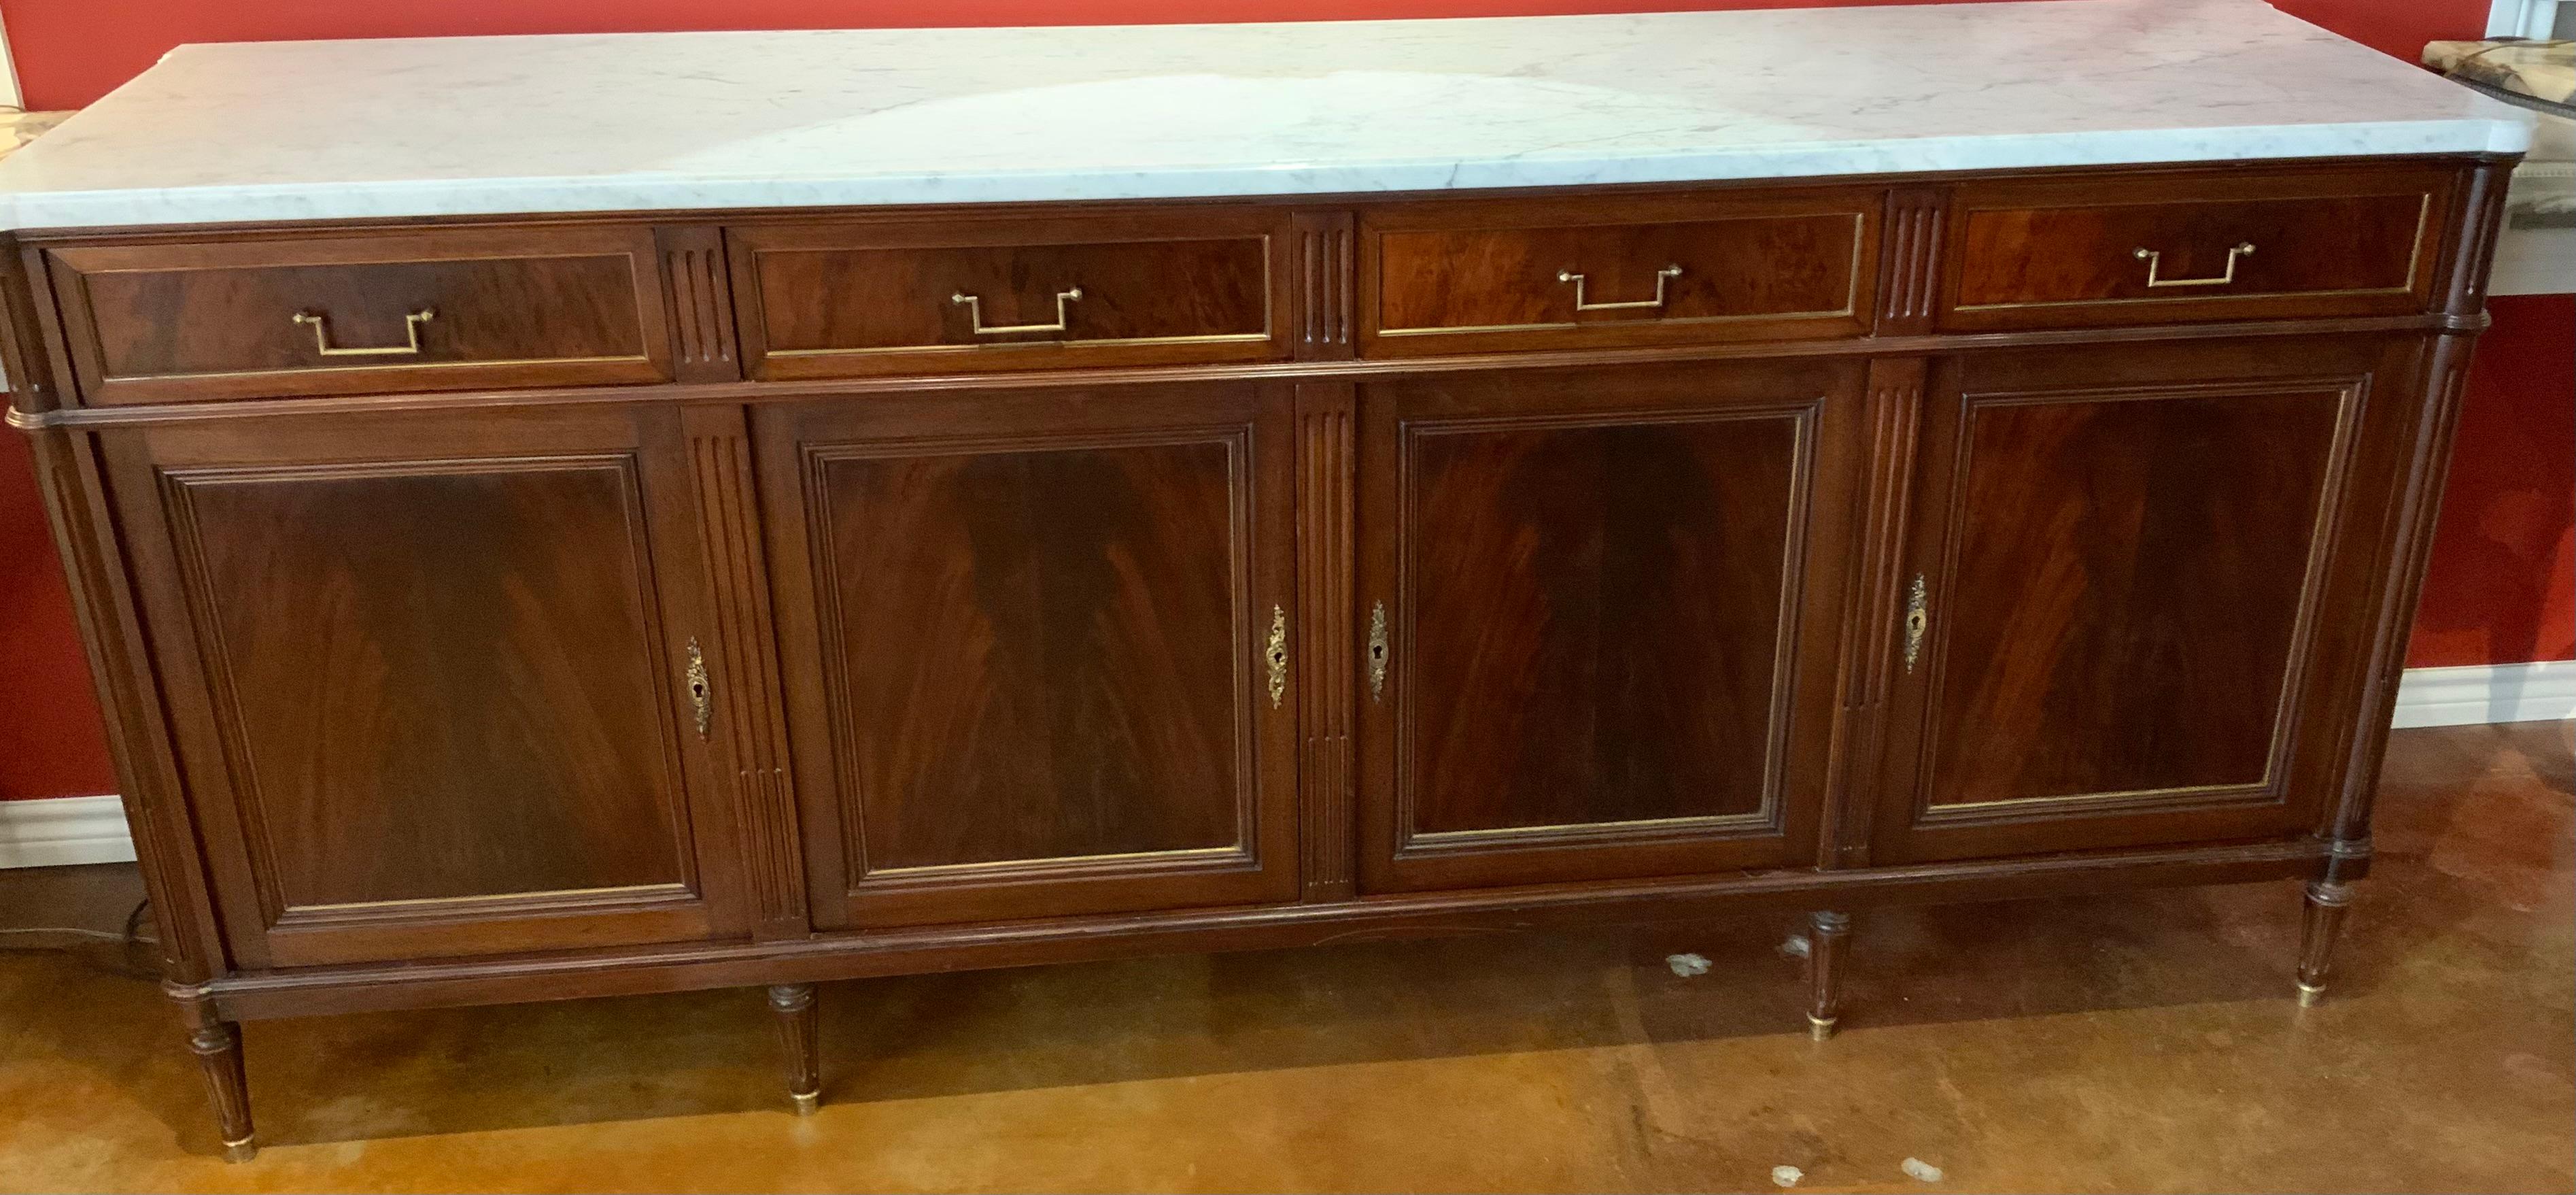 Louis XVI-Style sideboard/buffet mahogany with white marble top For Sale 4